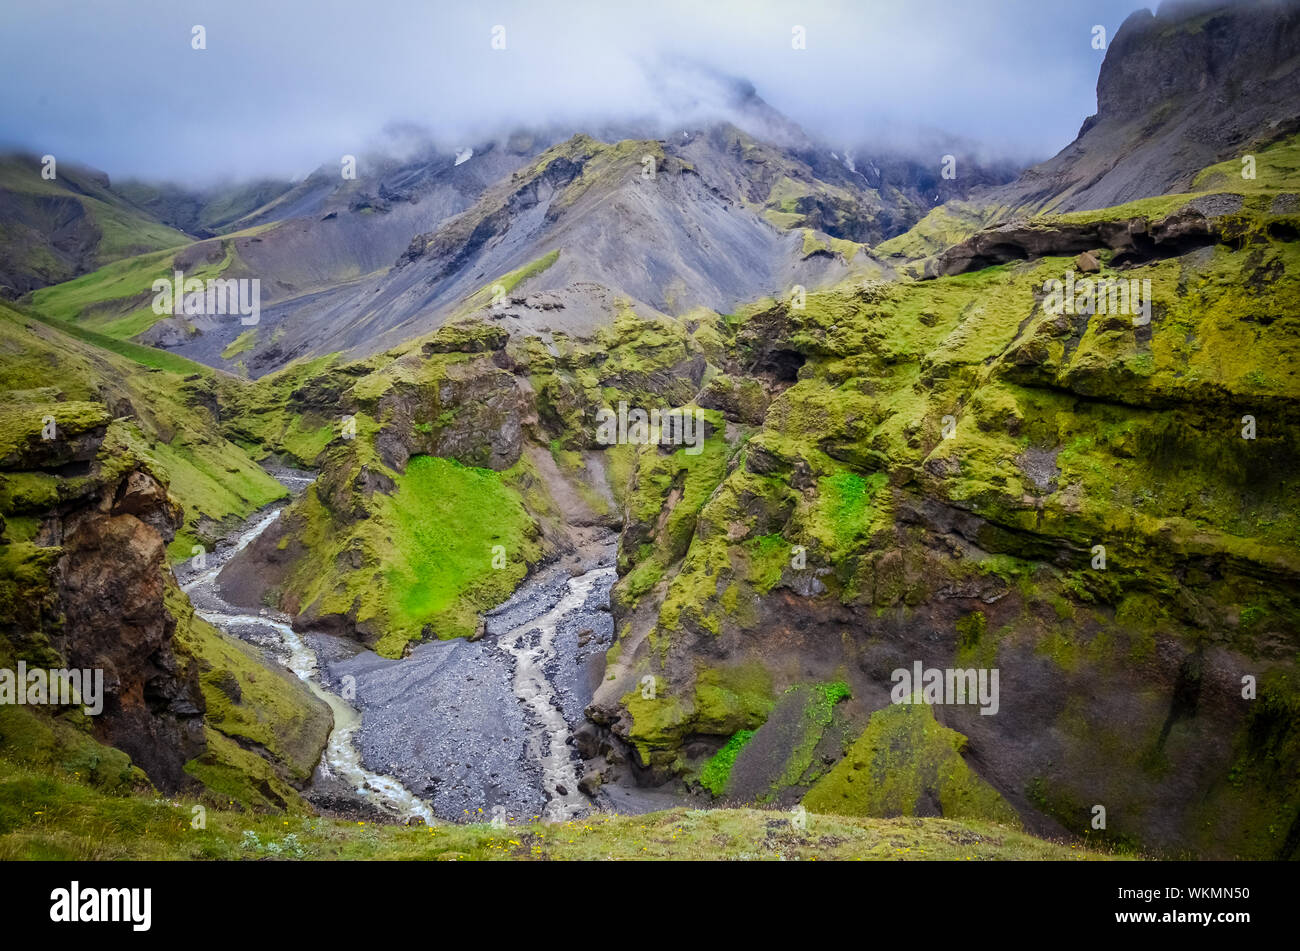 Landscape view of Thorsmork mountains canyon and river, near Skogar, Iceland Stock Photo